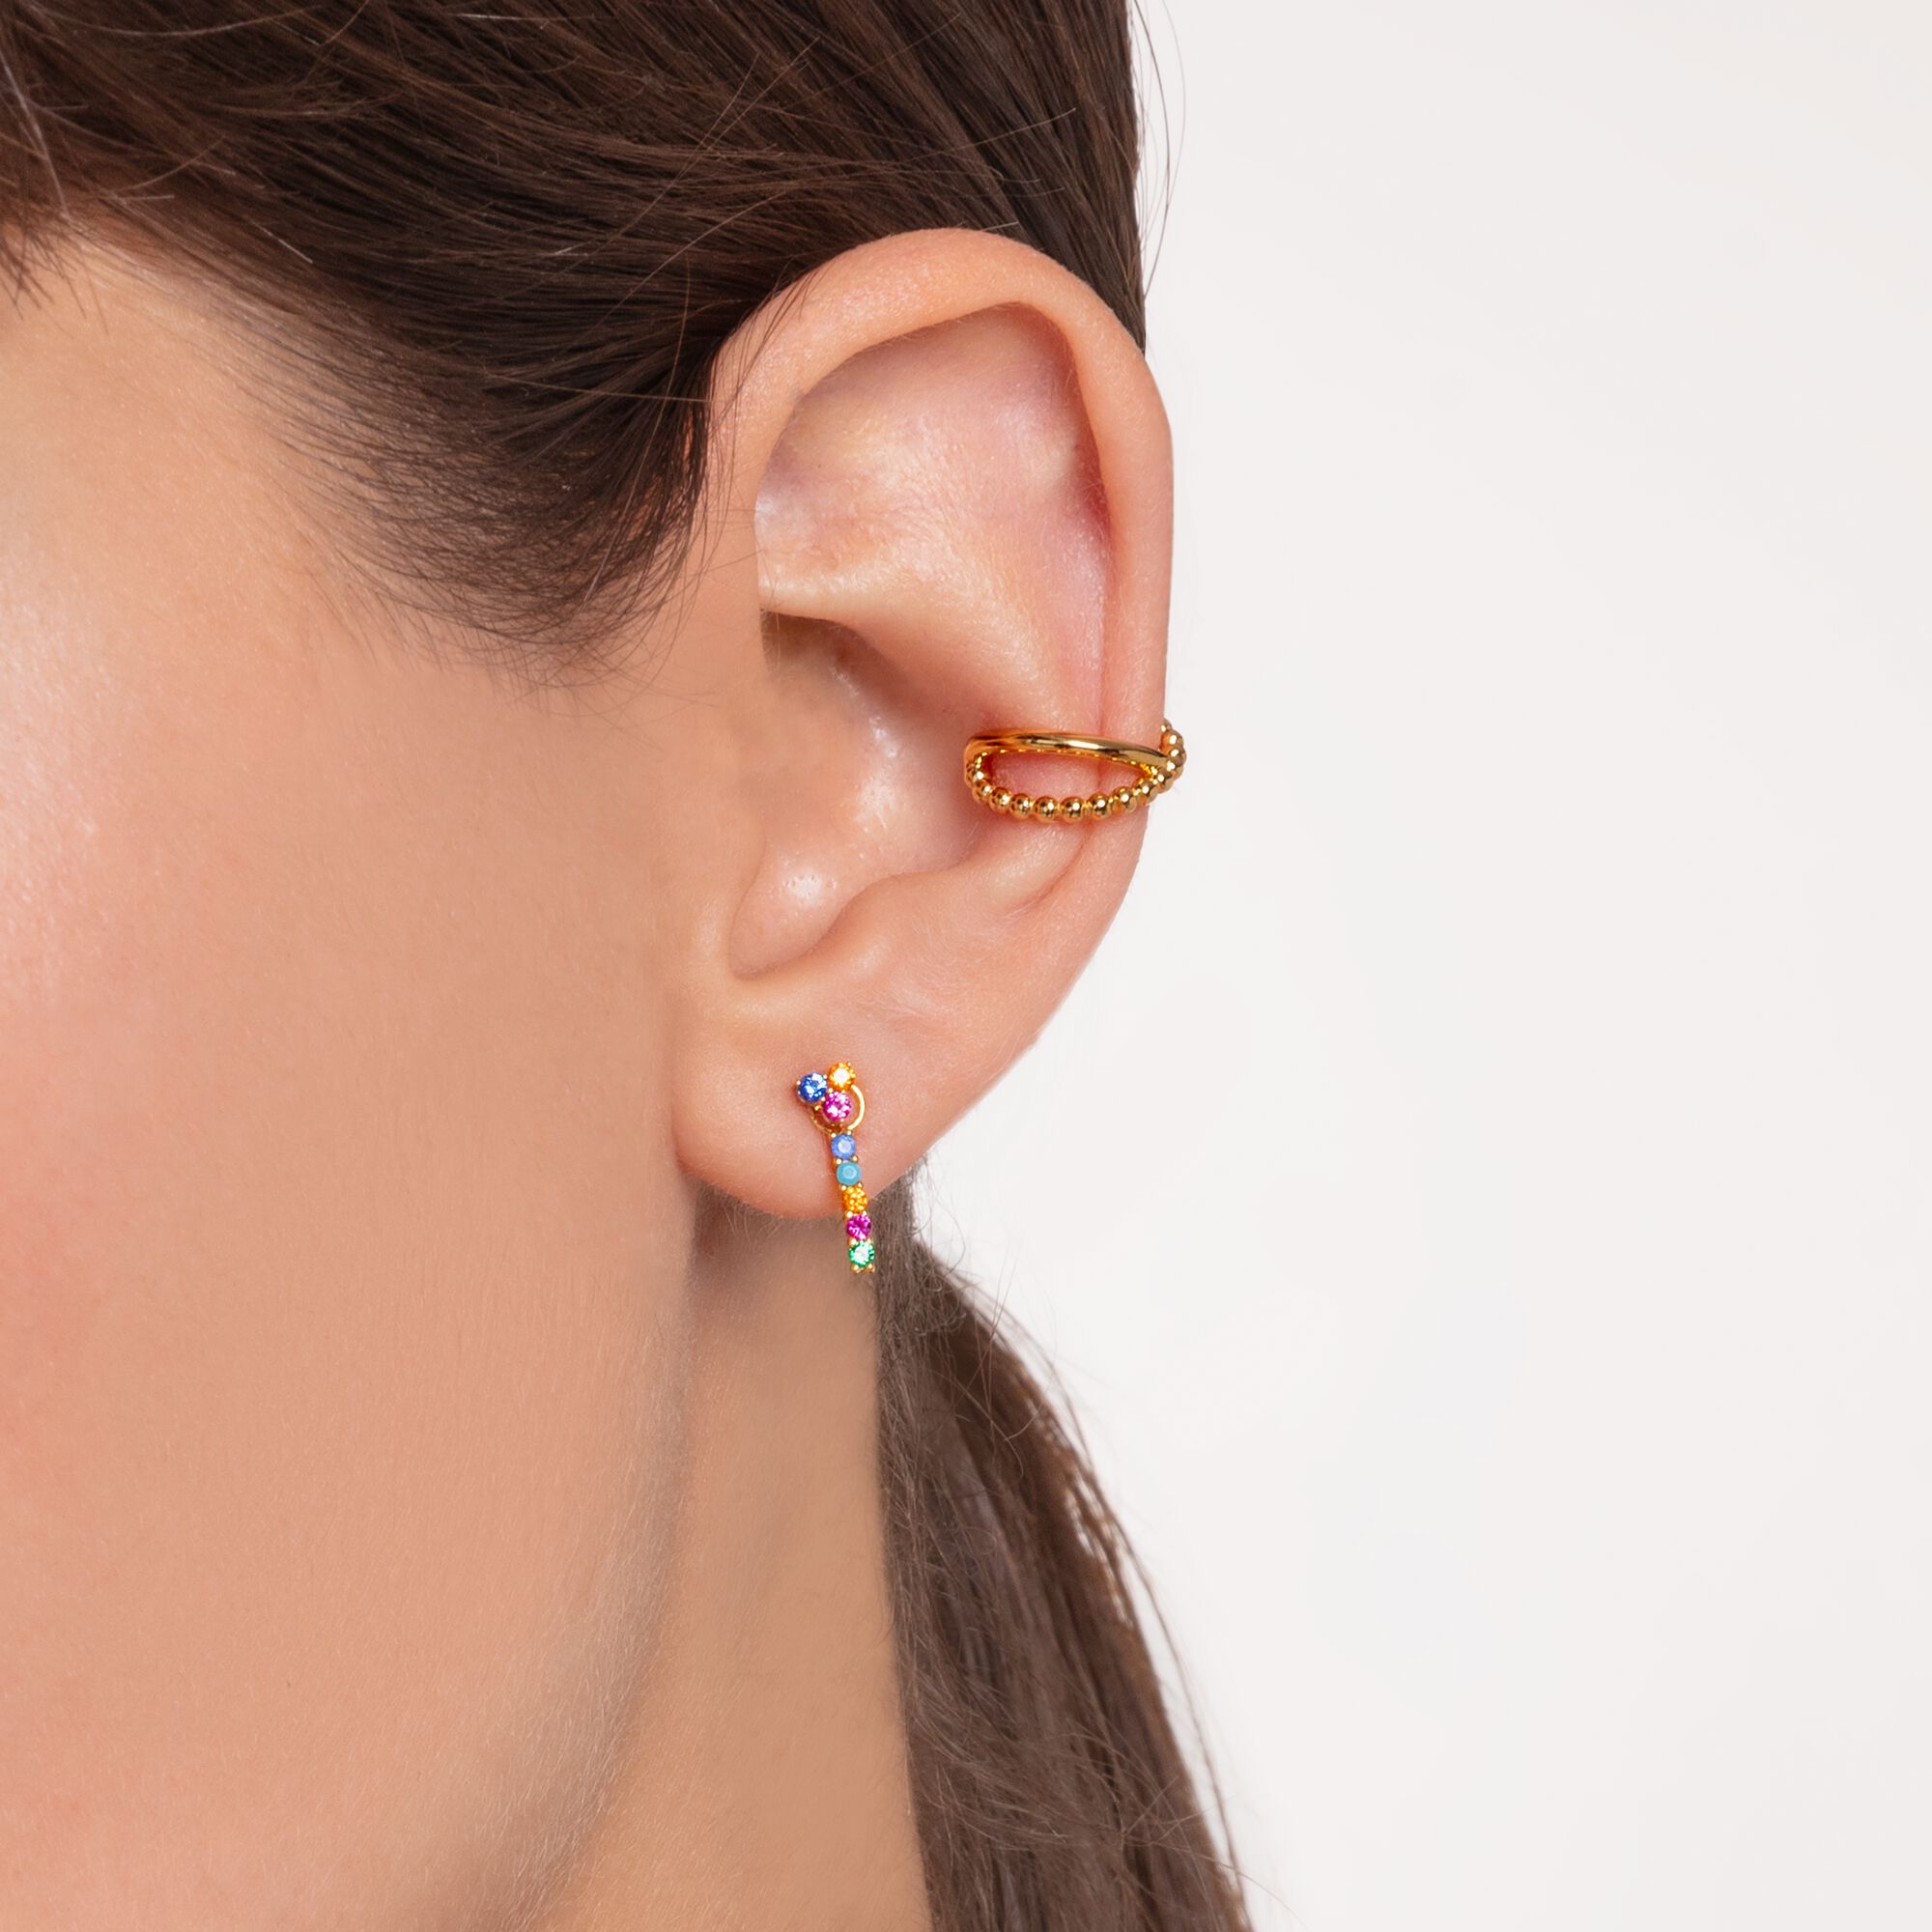 Ear cuff: Piercing-style in gold with THOMAS optic SABO